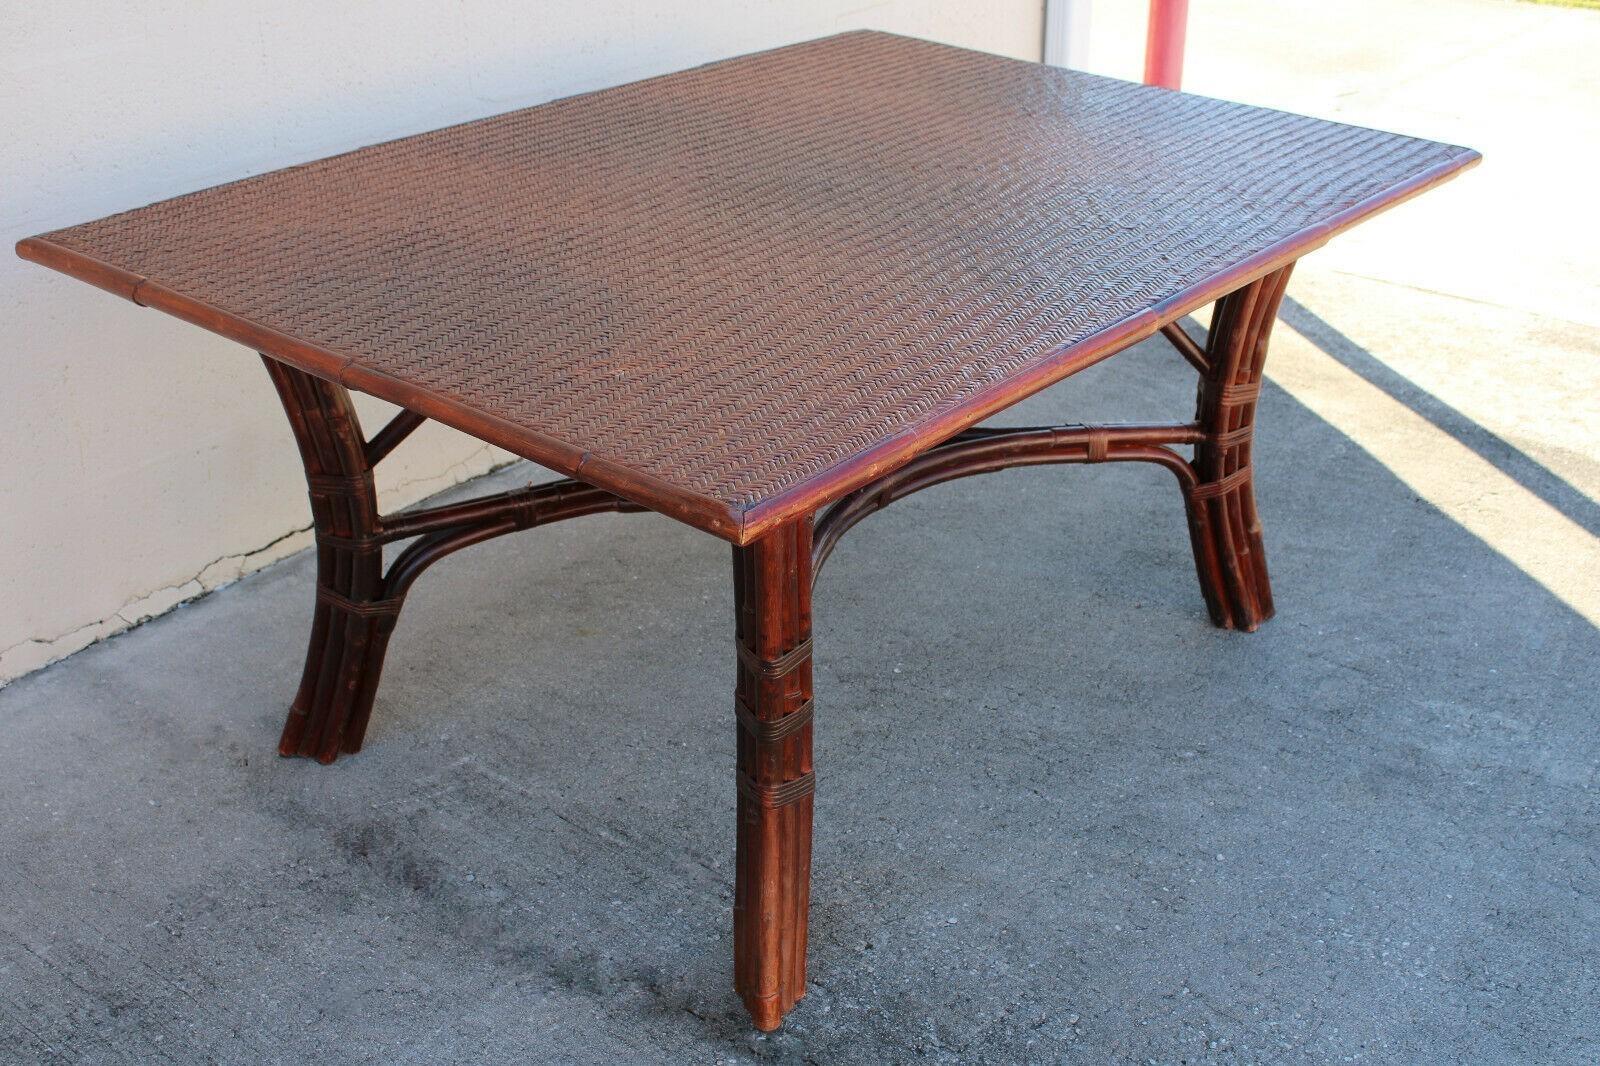 Vintage Ralph Lauren Collection Rattan Dining Table In Good Condition For Sale In Vero Beach, FL